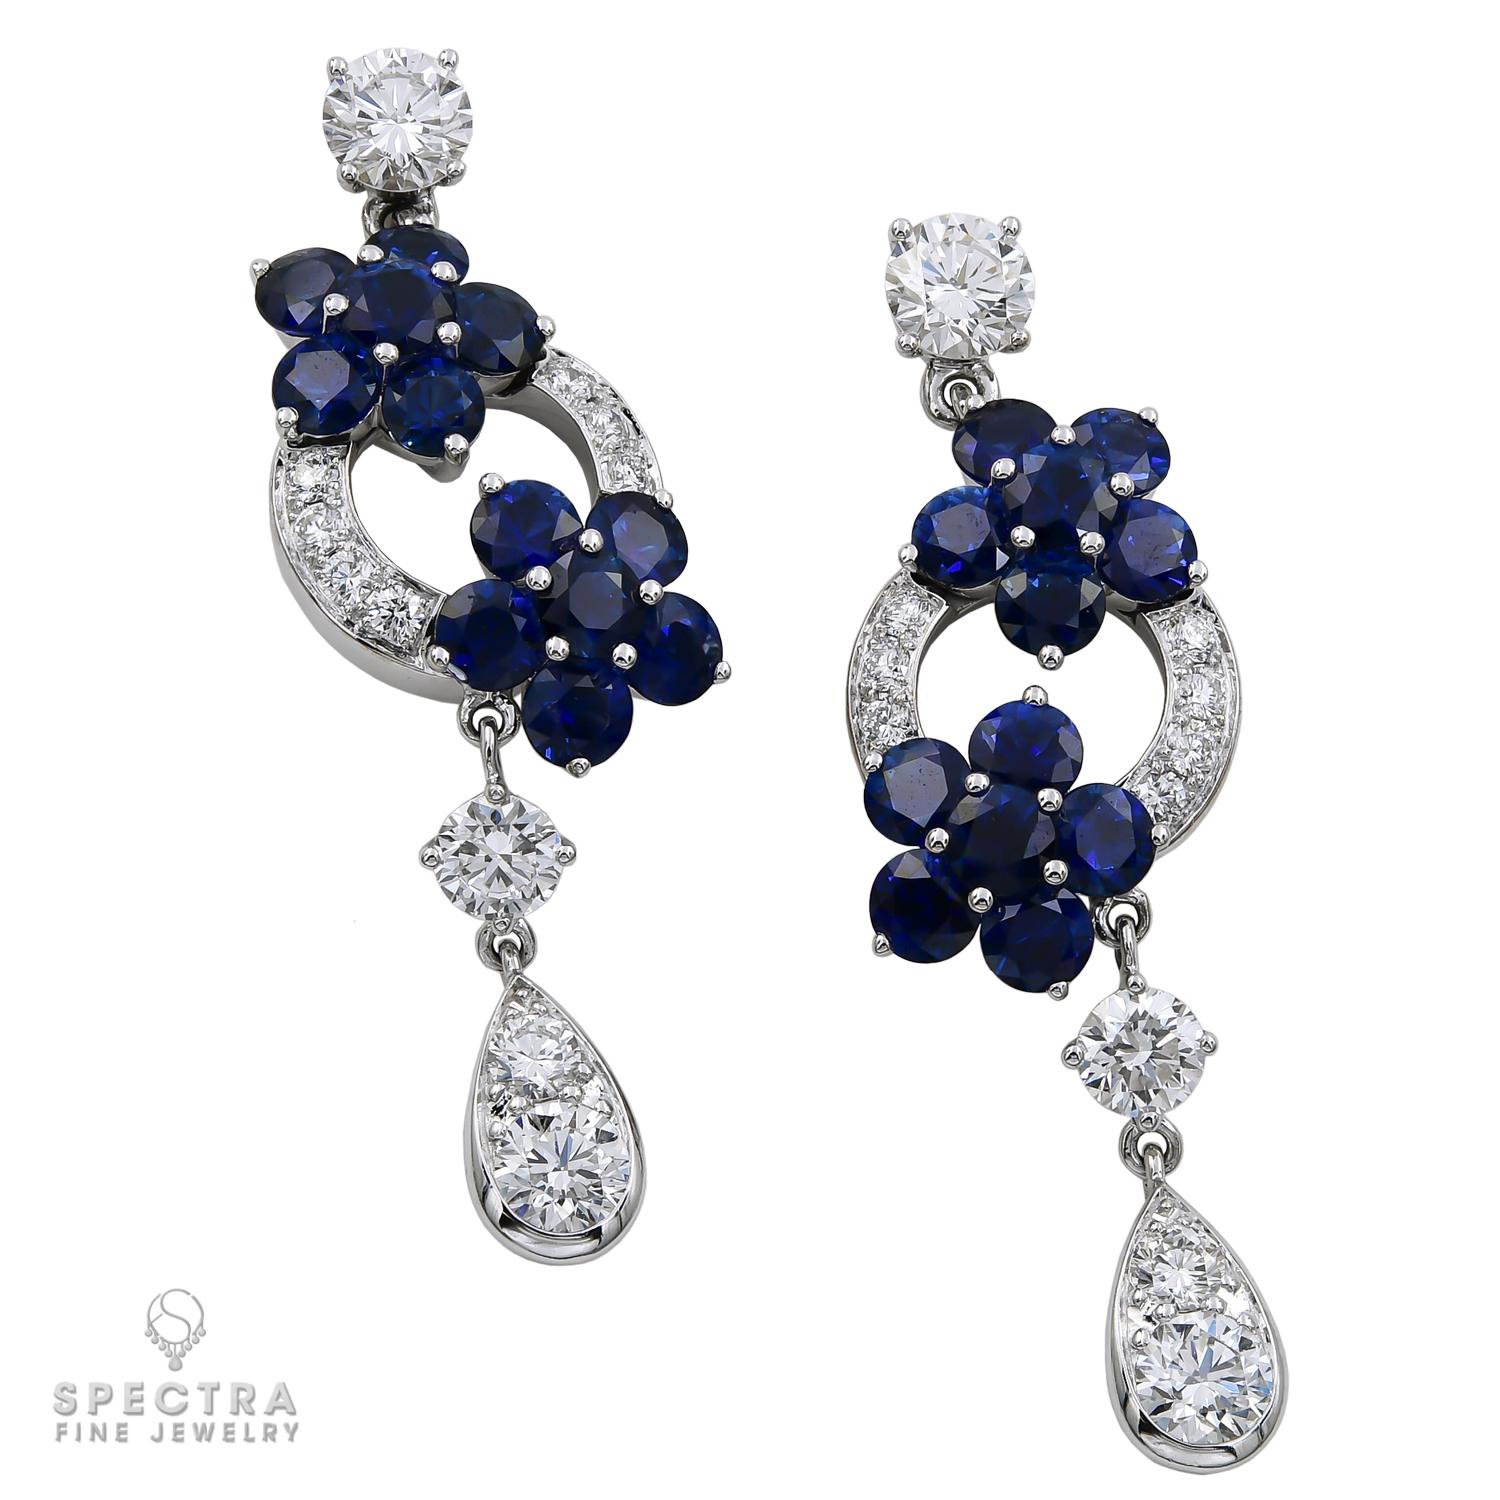 Beautiful earrings made by Graff and embellished with diamonds and sapphires.
22 diamonds weighing a total of 2.26 carats with D-E-F color, VS+ clarity.
24 sapphires weighing a total of 4.61 carats.
Metal is 18k white gold, gross weight 12.55